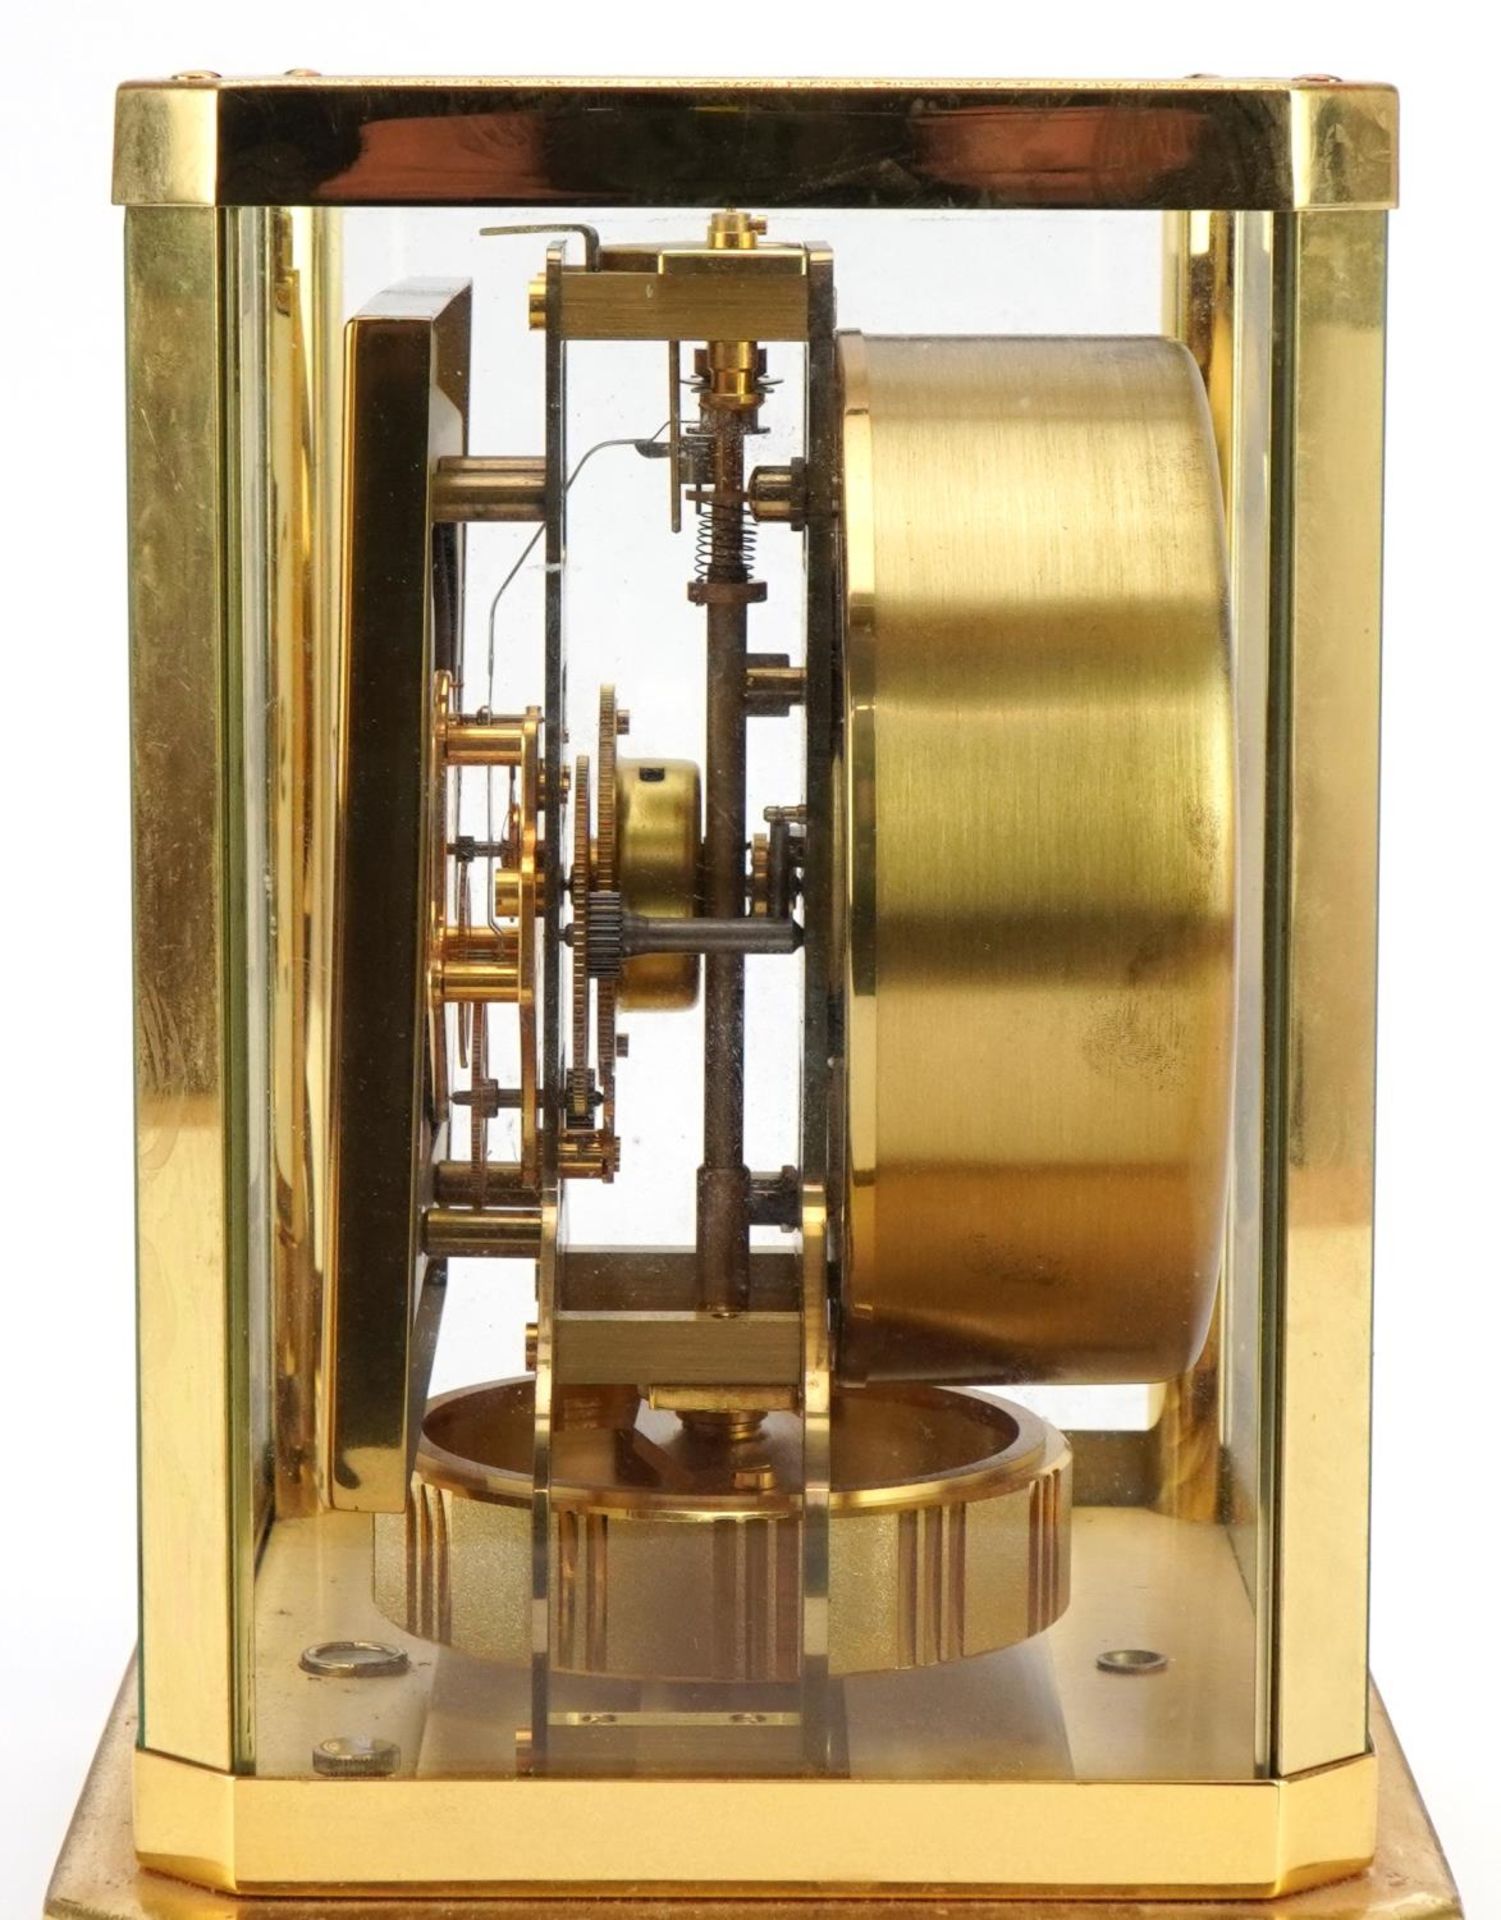 Jaeger LeCoultre brass cased Atmos clock, serial number 295987, 23.5cm high - Image 2 of 3